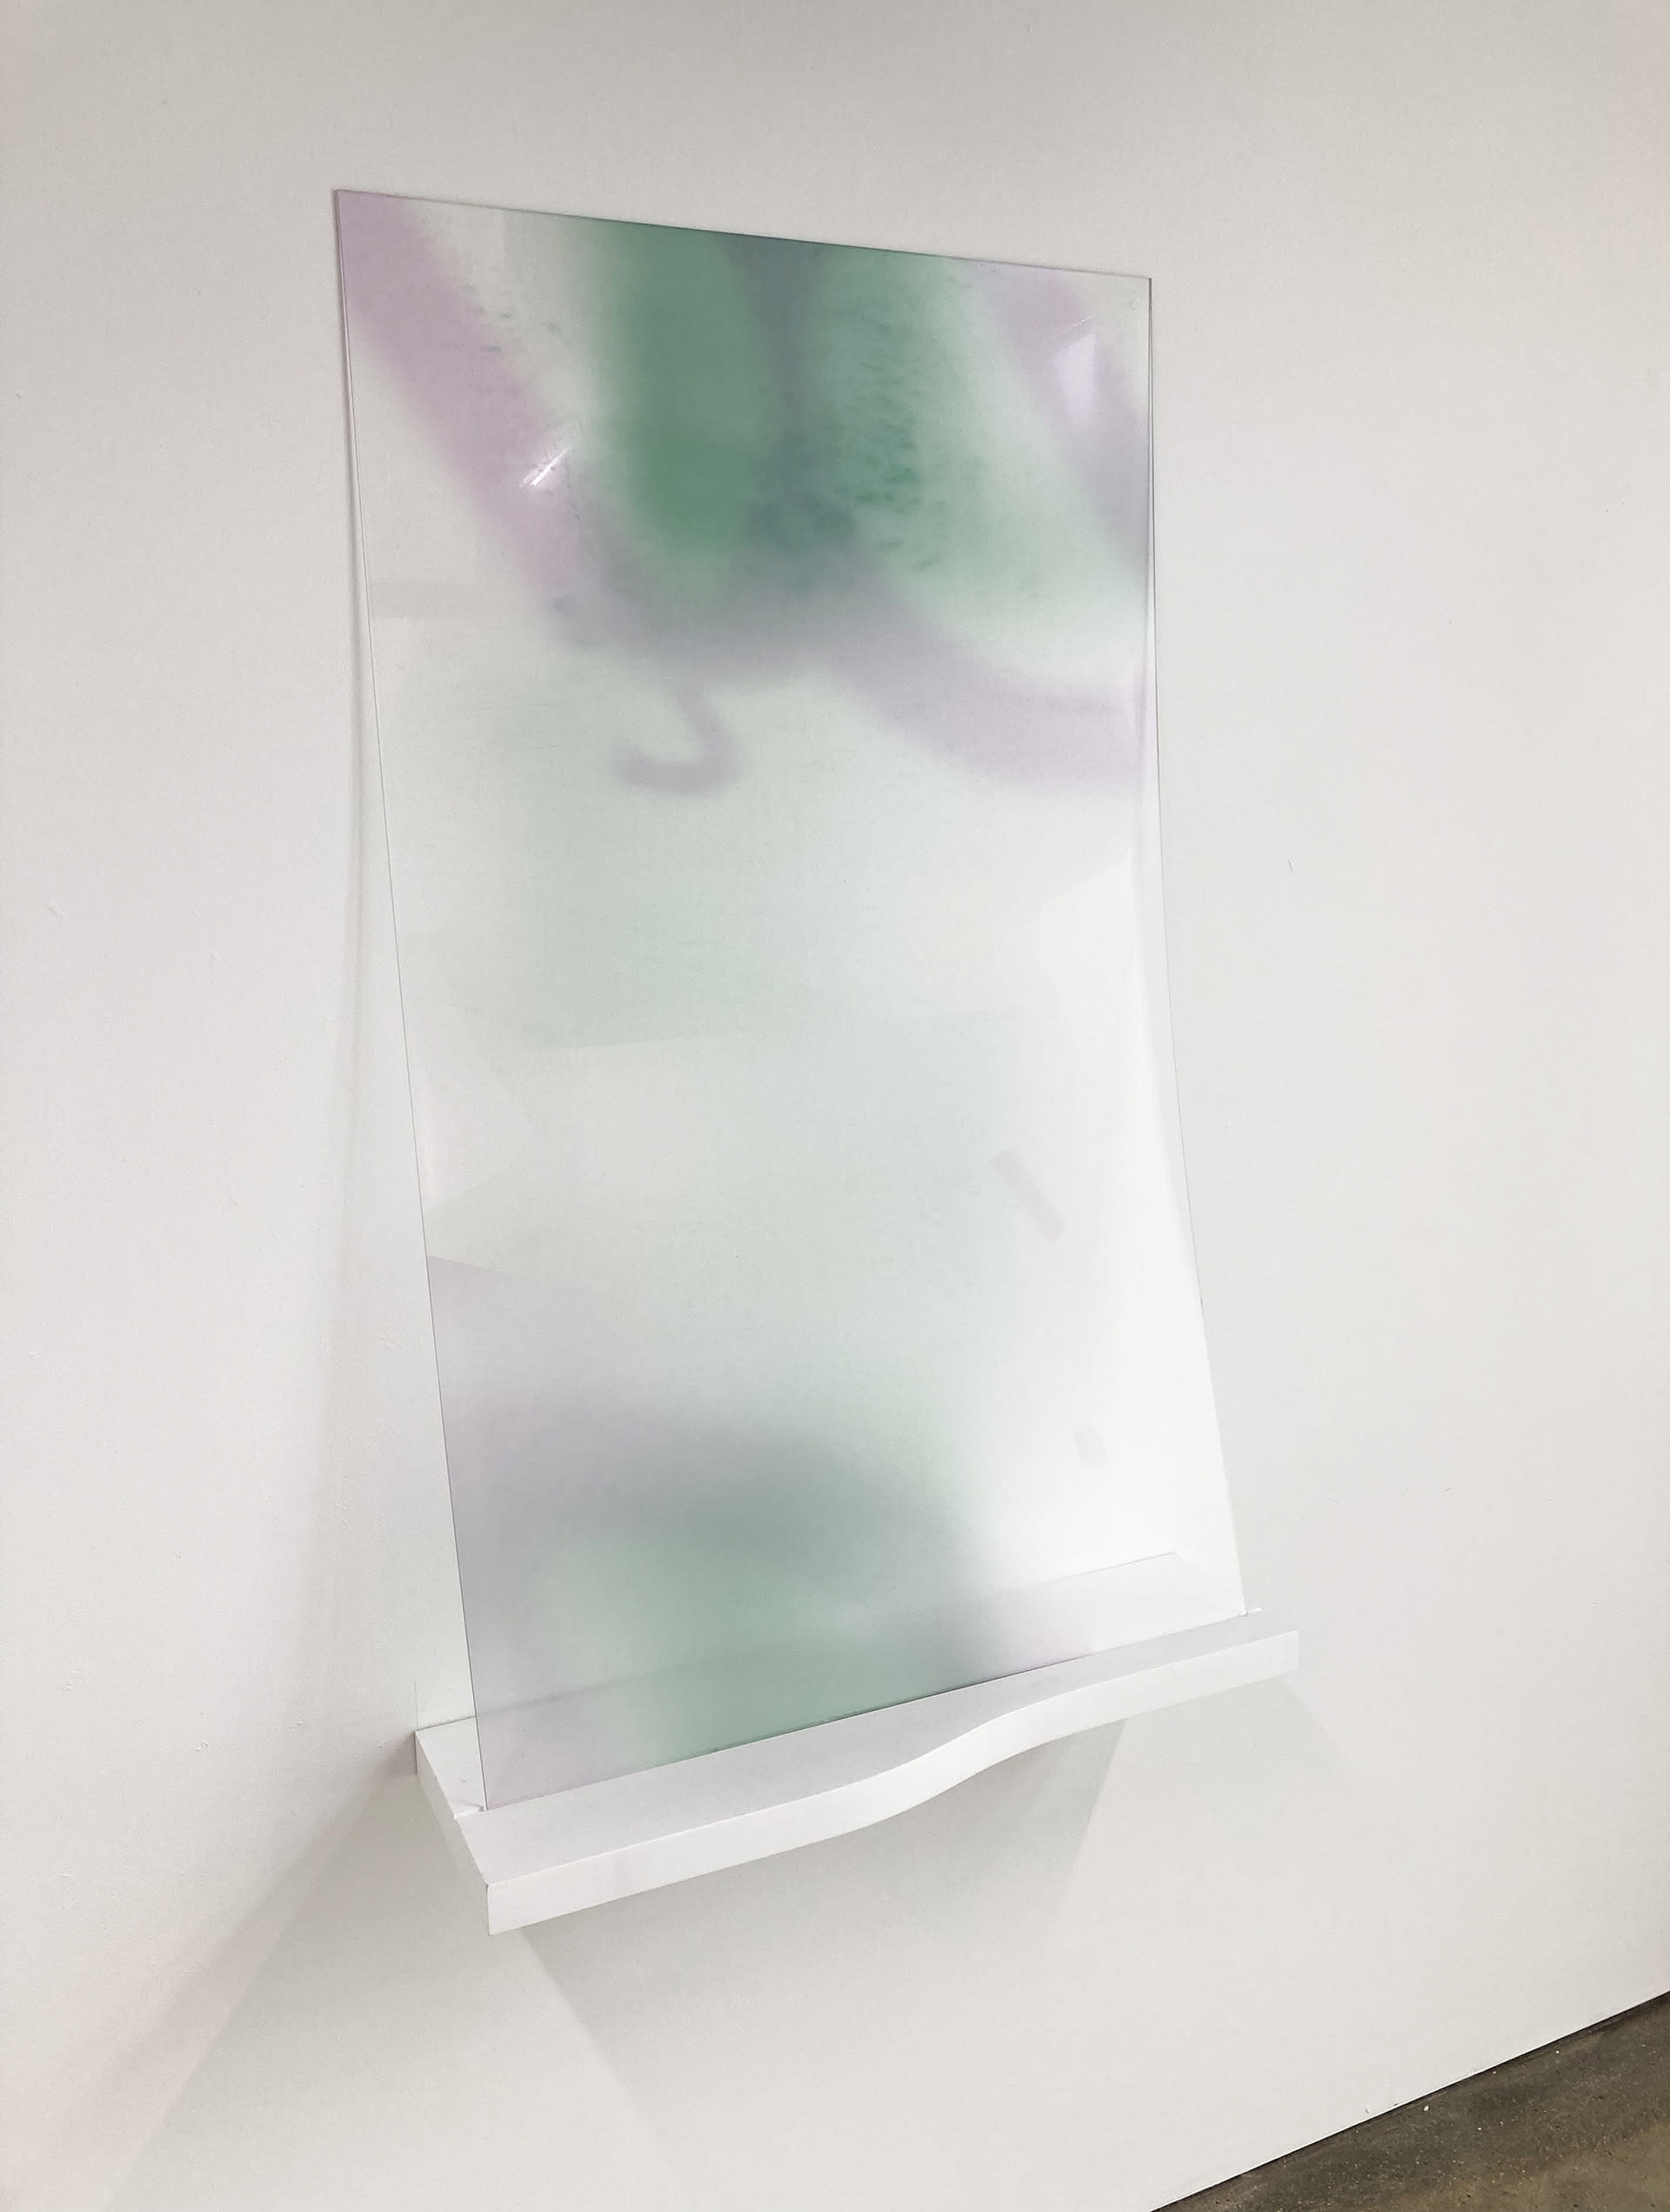 A sheet of acrylic printed with a green background and two purple D shaped forms at the top.